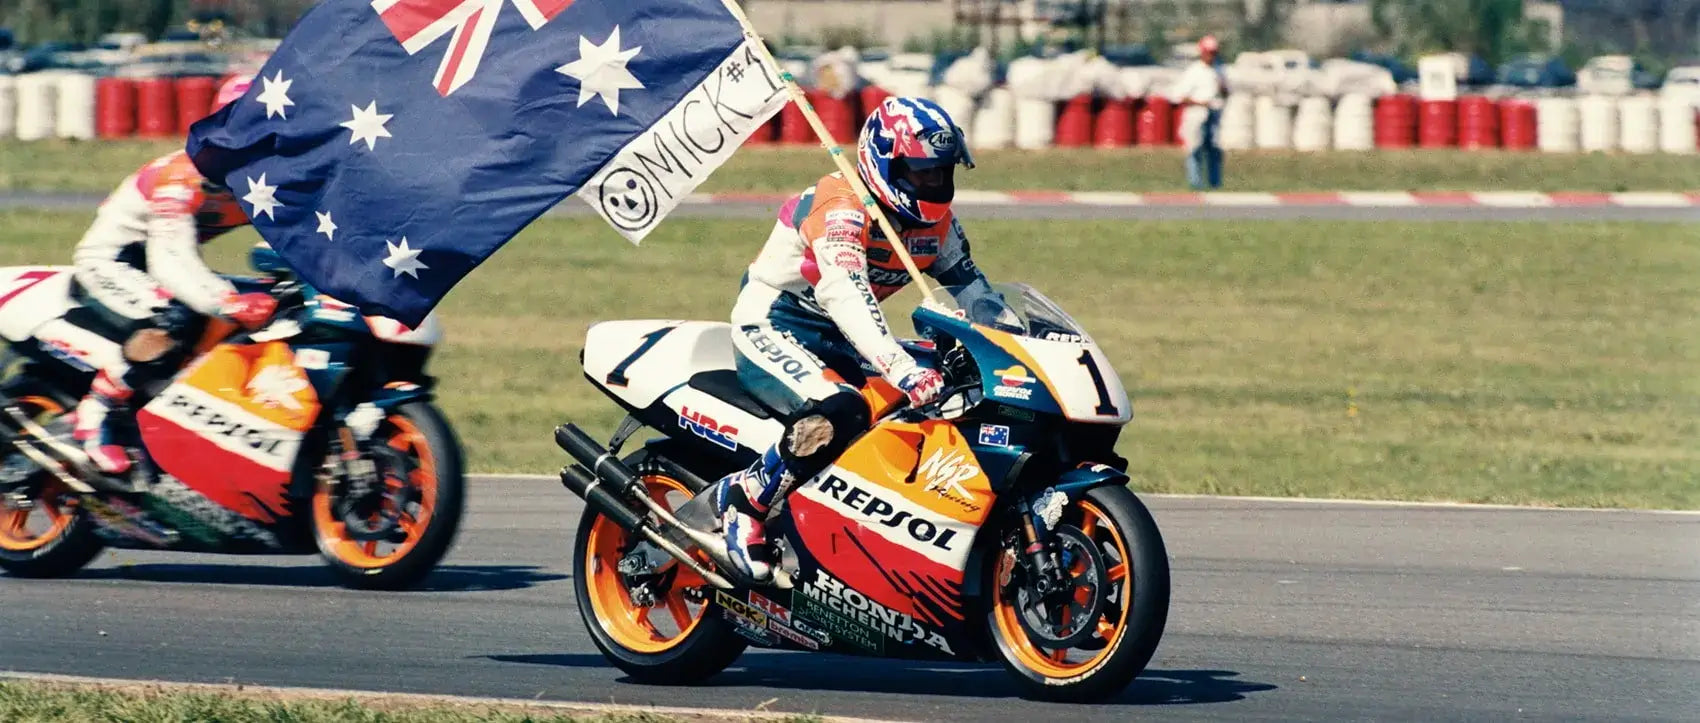 Mick Doohan - A Champion That Almost Wasn't